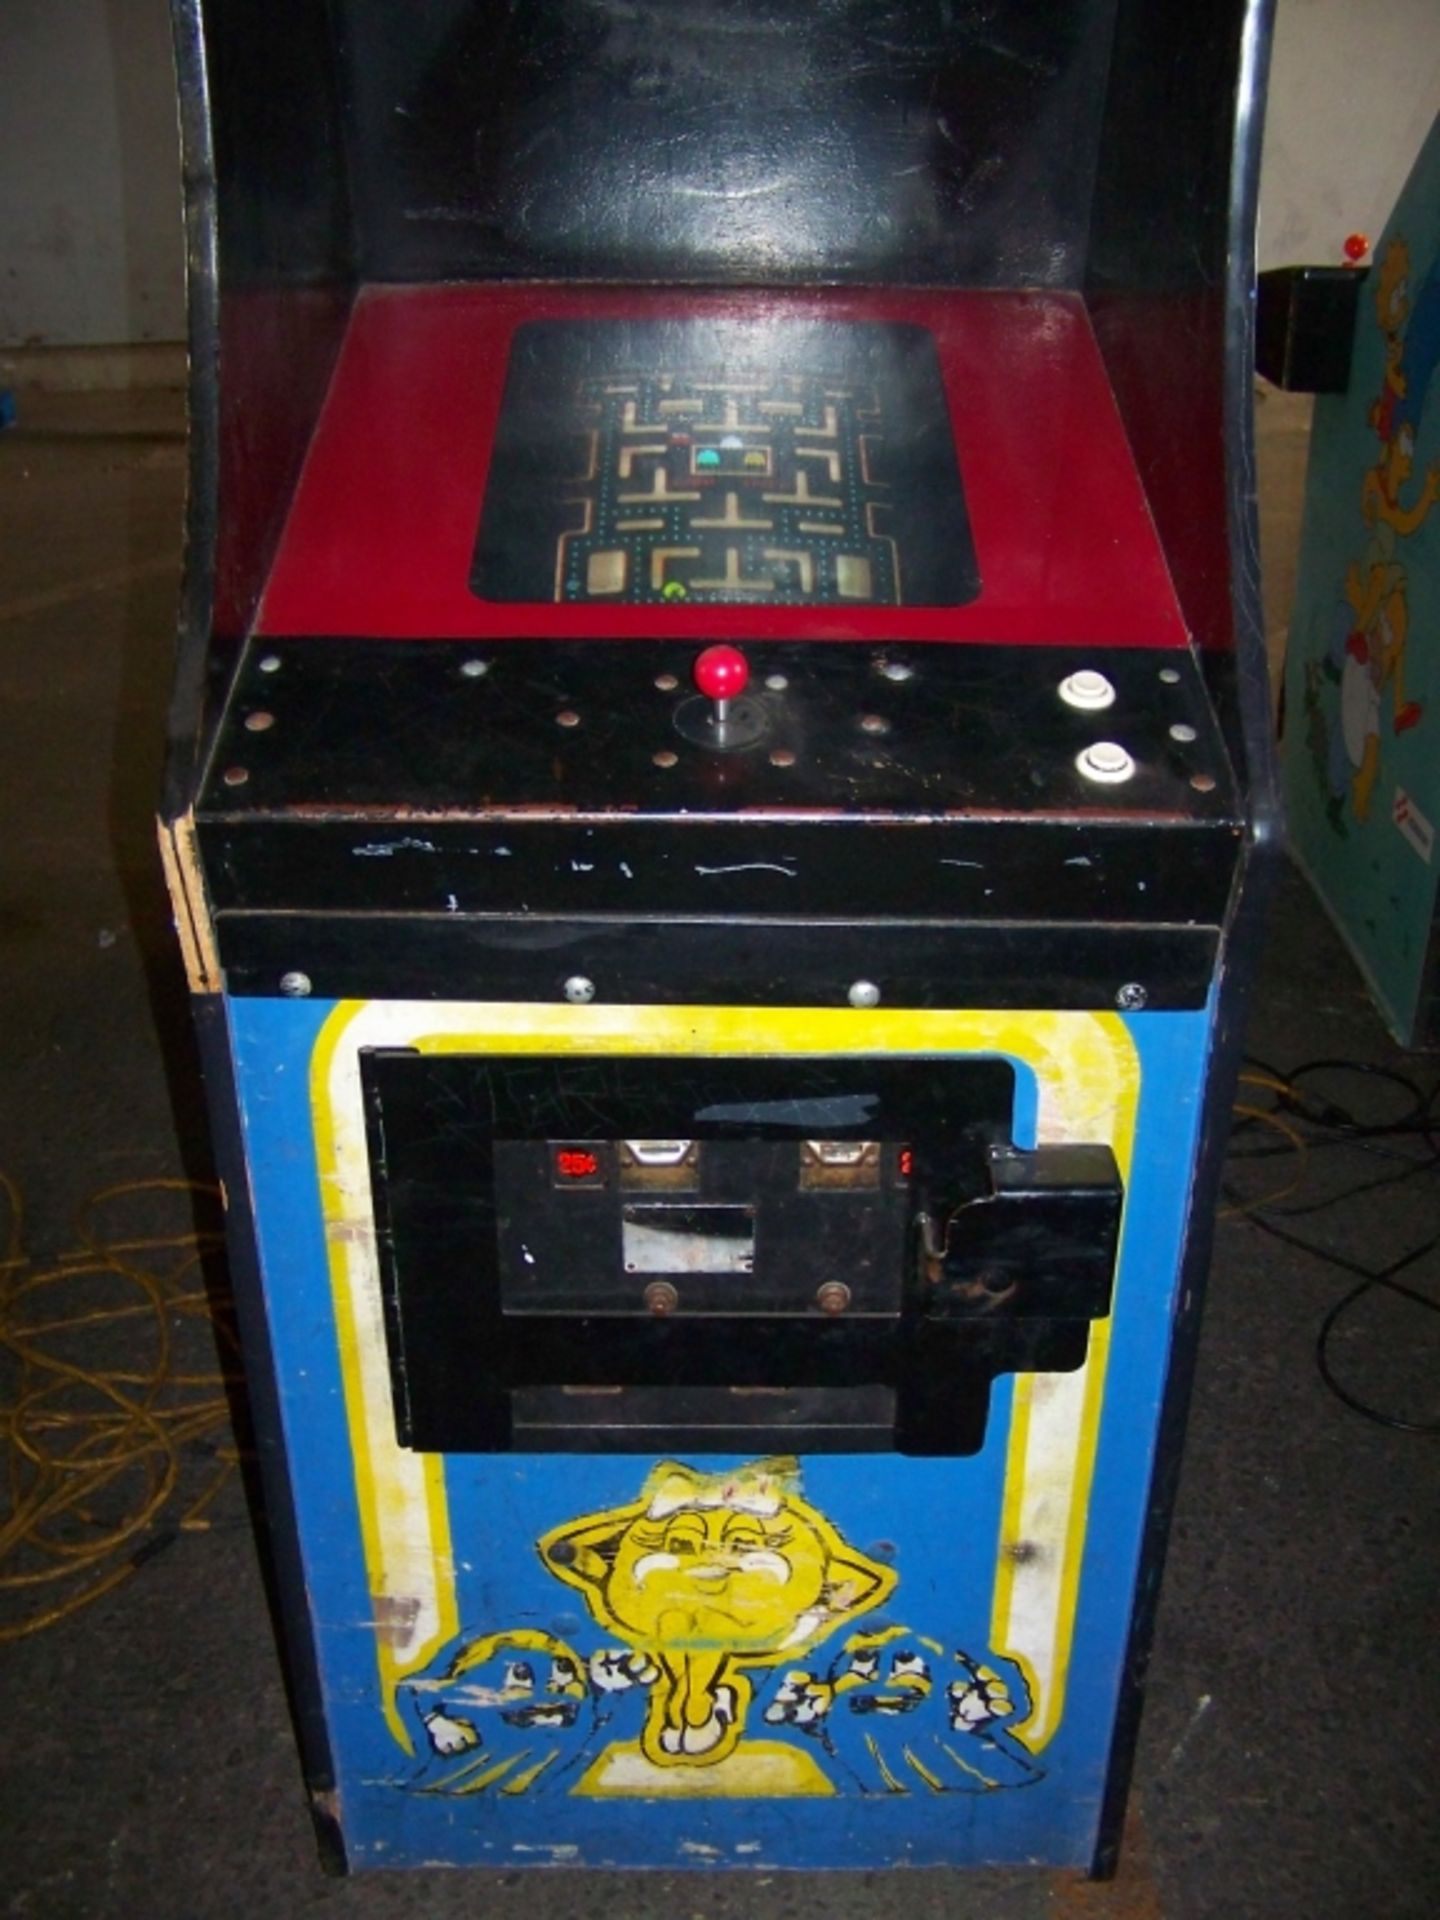 MS PACMAN UPRIGHT ARCADE GAME BALLY MIDWAY - Image 3 of 4